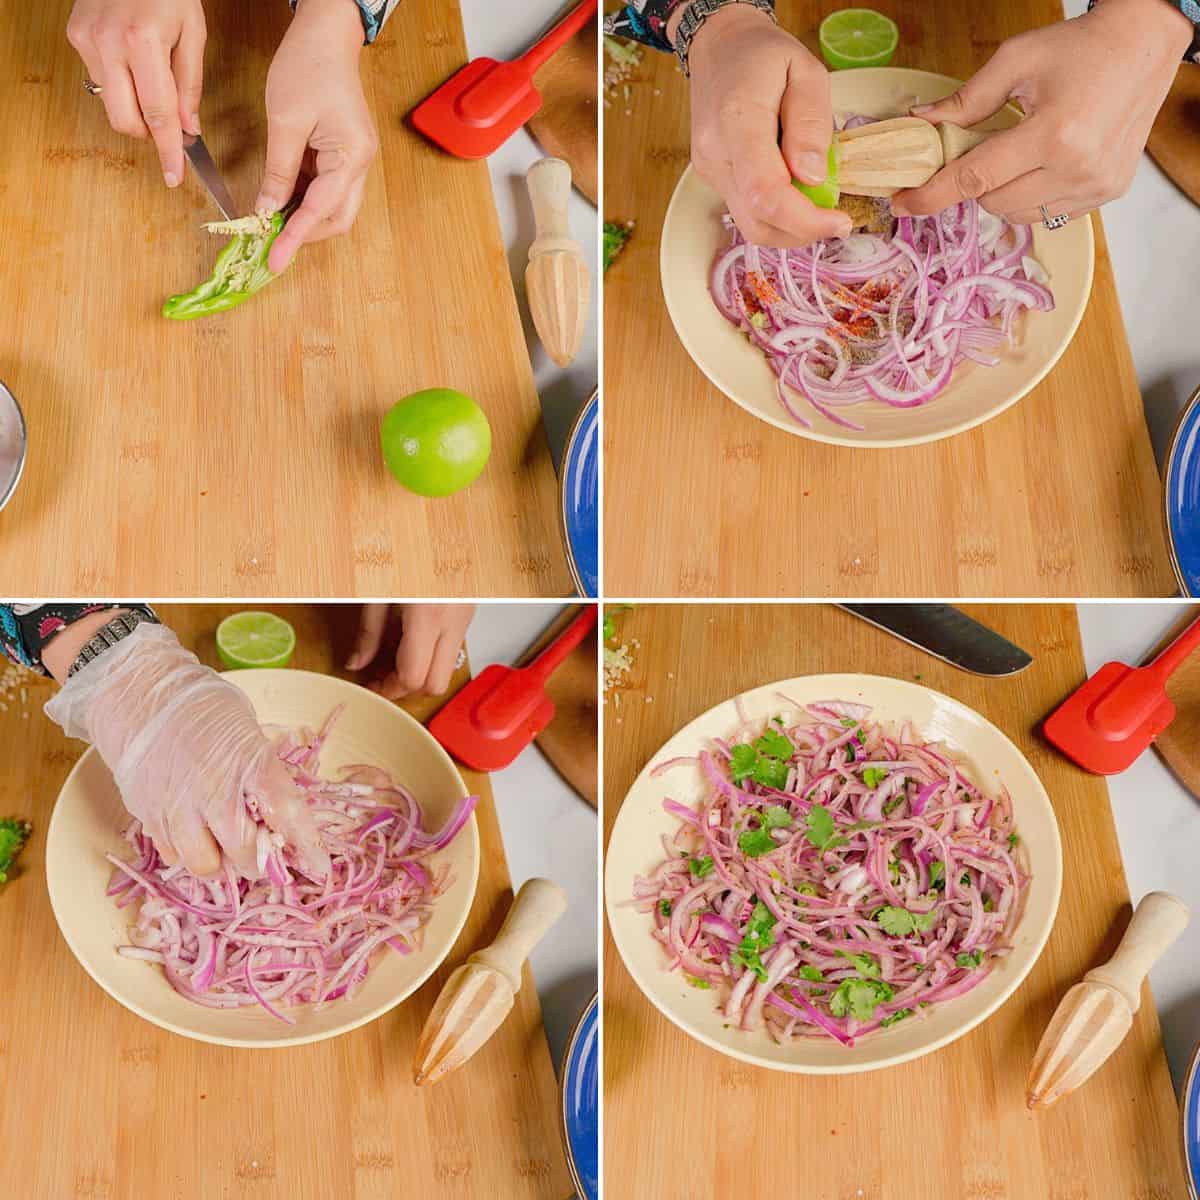 Making of the Indian salad.